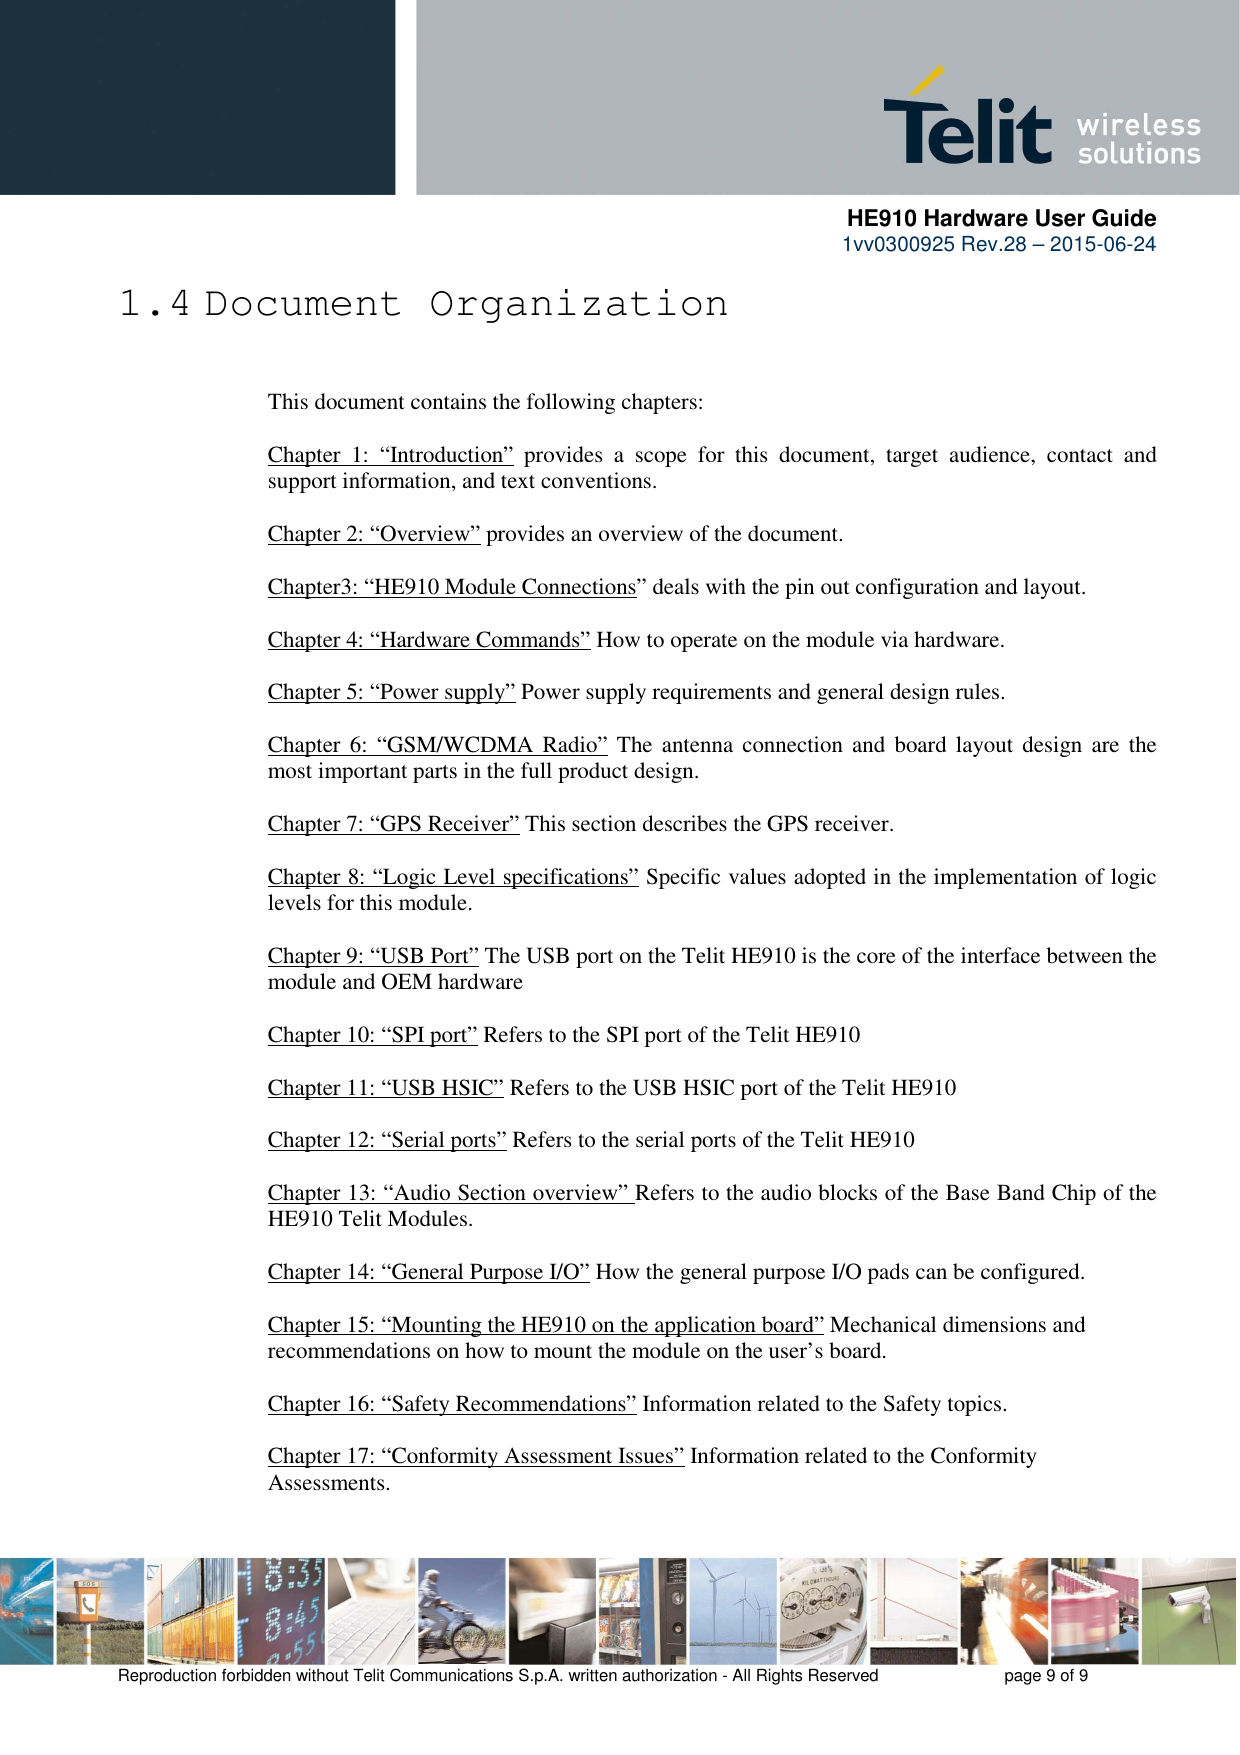      HE910 Hardware User Guide 1vv0300925 Rev.28 – 2015-06-24    Reproduction forbidden without Telit Communications S.p.A. written authorization - All Rights Reserved    page 9 of 9  1.4 Document Organization  This document contains the following chapters:  Chapter  1:  “Introduction”  provides  a  scope  for  this  document,  target  audience,  contact  and support information, and text conventions.  Chapter 2: “Overview” provides an overview of the document.  Chapter3: “HE910 Module Connections” deals with the pin out configuration and layout.  Chapter 4: “Hardware Commands” How to operate on the module via hardware.  Chapter 5: “Power supply” Power supply requirements and general design rules.  Chapter  6:  “GSM/WCDMA Radio”  The antenna connection and  board  layout design  are  the most important parts in the full product design.  Chapter 7: “GPS Receiver” This section describes the GPS receiver.  Chapter 8: “Logic Level specifications” Specific values adopted in the implementation of logic levels for this module.            Chapter 9: “USB Port” The USB port on the Telit HE910 is the core of the interface between the module and OEM hardware  Chapter 10: “SPI port” Refers to the SPI port of the Telit HE910   Chapter 11: “USB HSIC” Refers to the USB HSIC port of the Telit HE910   Chapter 12: “Serial ports” Refers to the serial ports of the Telit HE910   Chapter 13: “Audio Section overview” Refers to the audio blocks of the Base Band Chip of the HE910 Telit Modules.  Chapter 14: “General Purpose I/O” How the general purpose I/O pads can be configured.  Chapter 15: “Mounting the HE910 on the application board” Mechanical dimensions and recommendations on how to mount the module on the user’s board.  Chapter 16: “Safety Recommendations” Information related to the Safety topics.  Chapter 17: “Conformity Assessment Issues” Information related to the Conformity Assessments.  